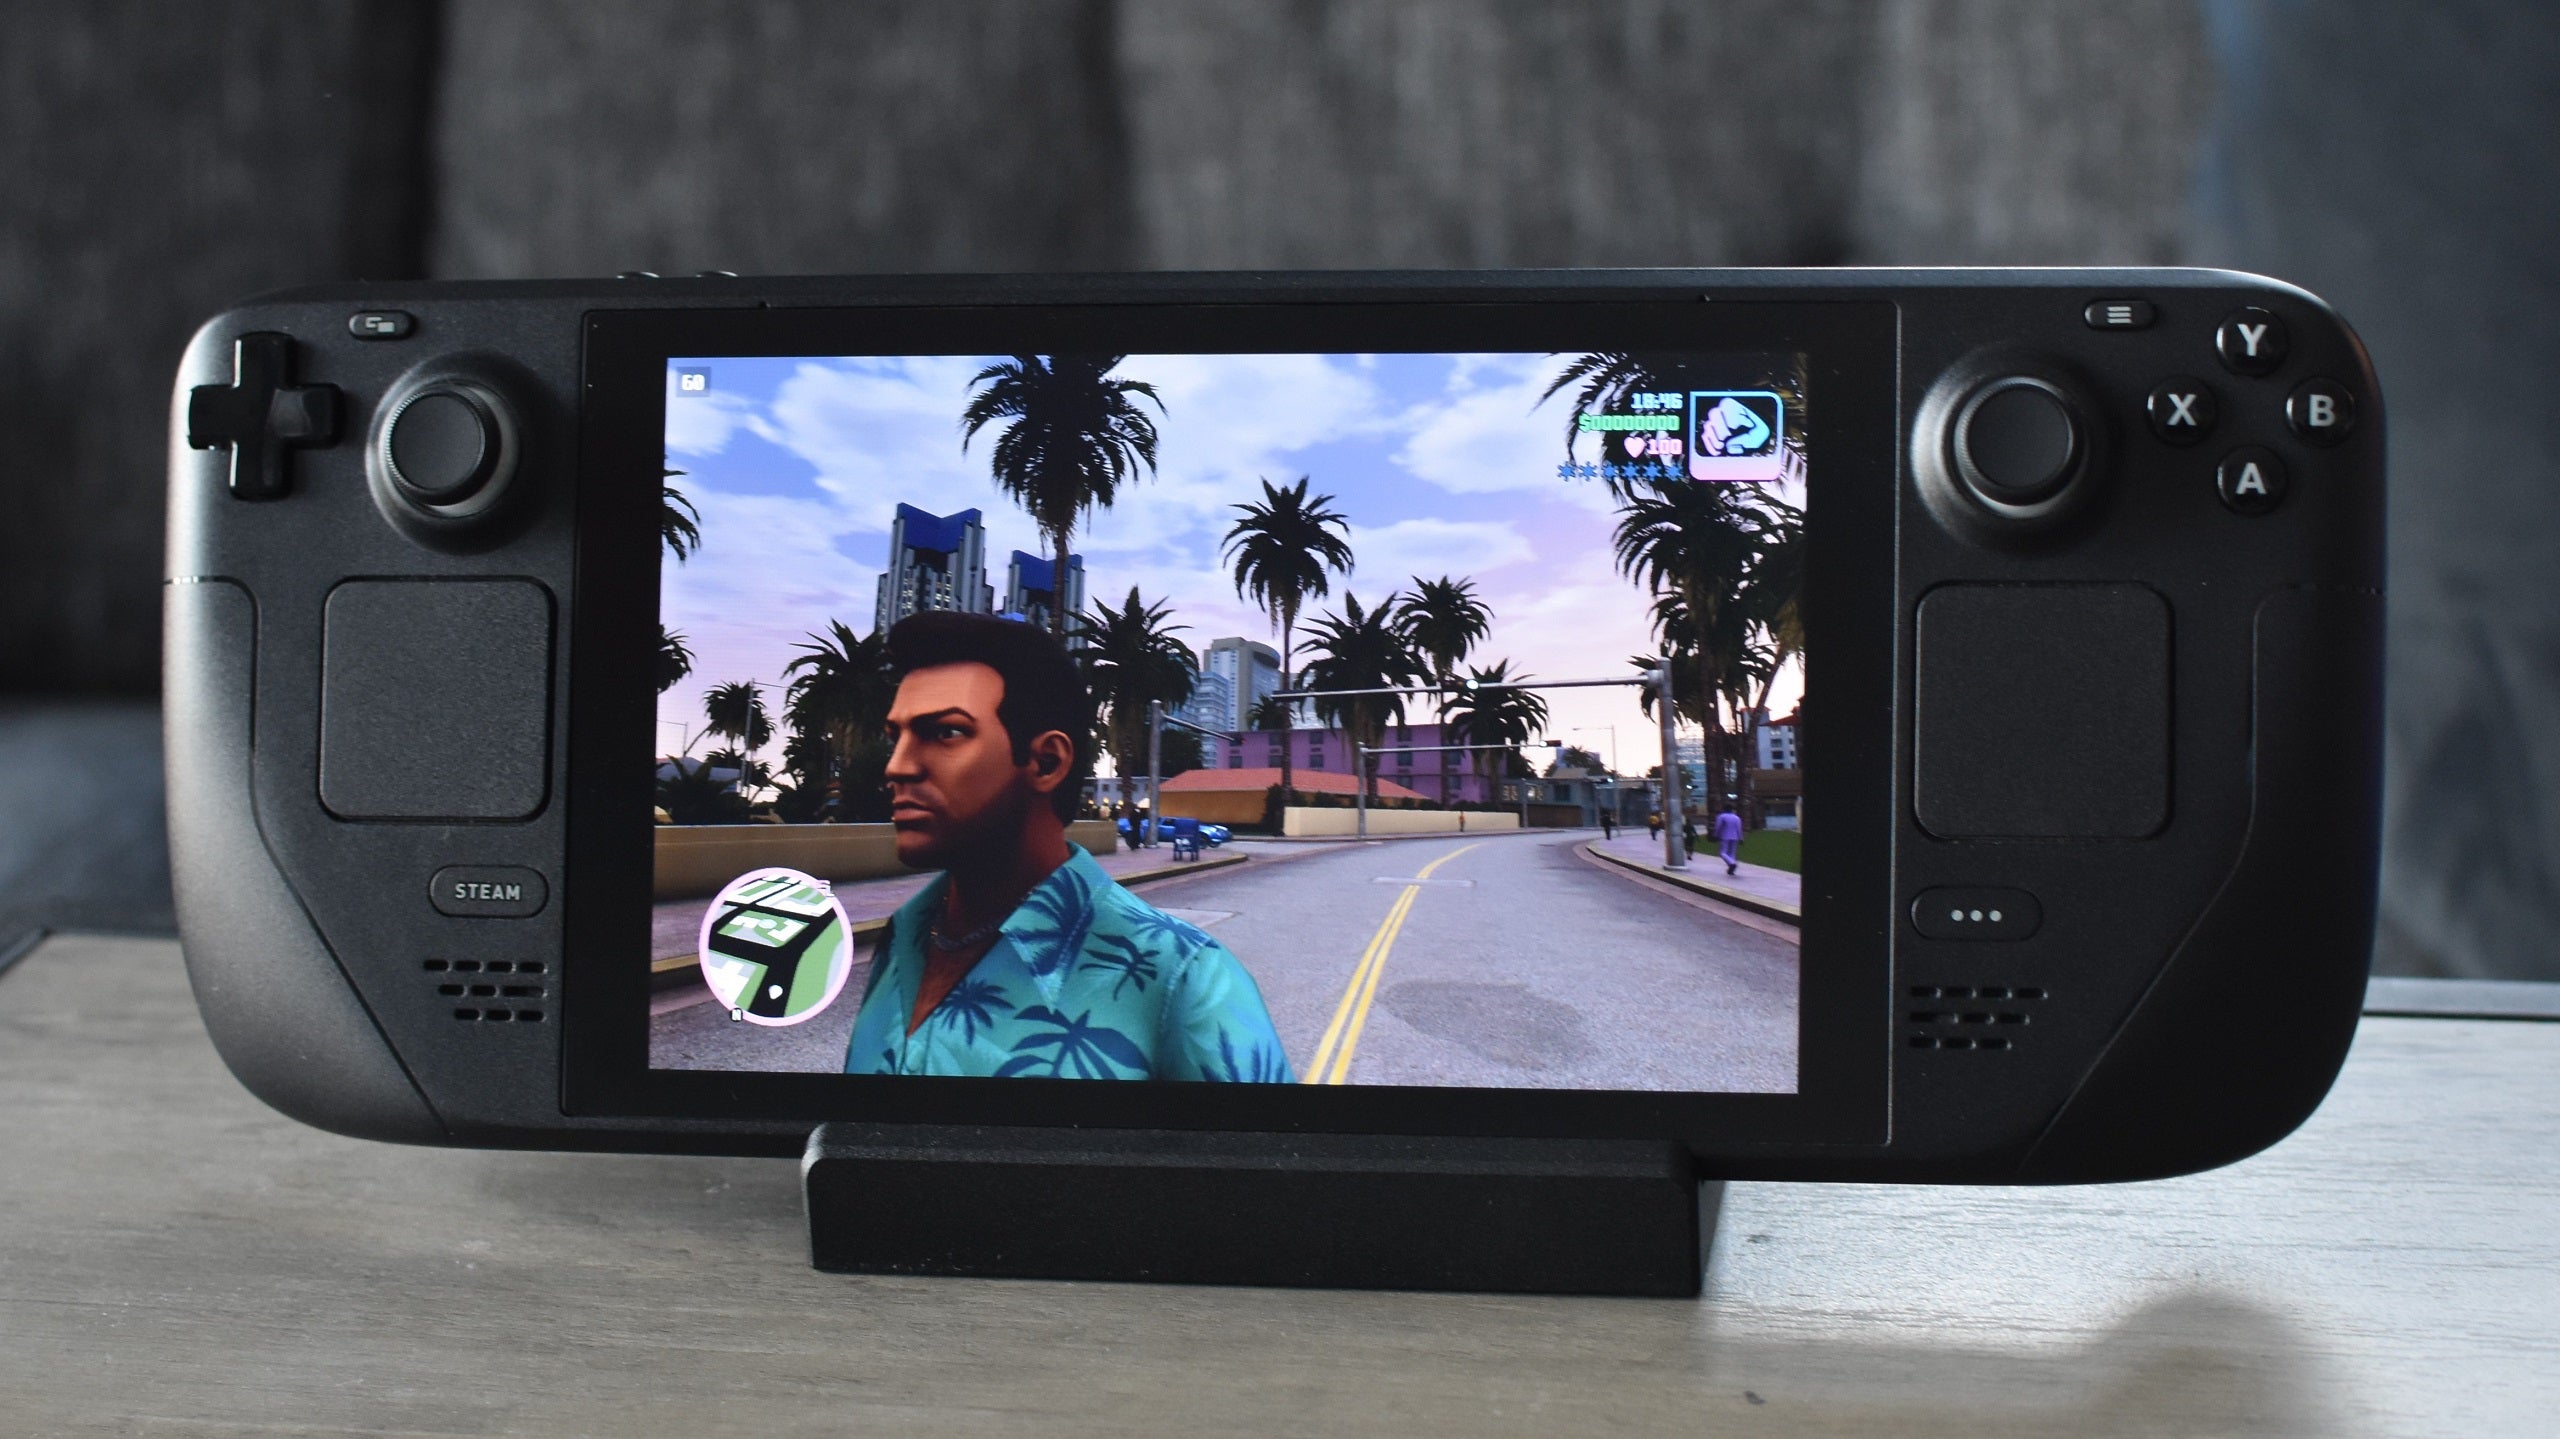 Grand Theft Auto: Vice City - Definitive Edition running on a Steam Deck.